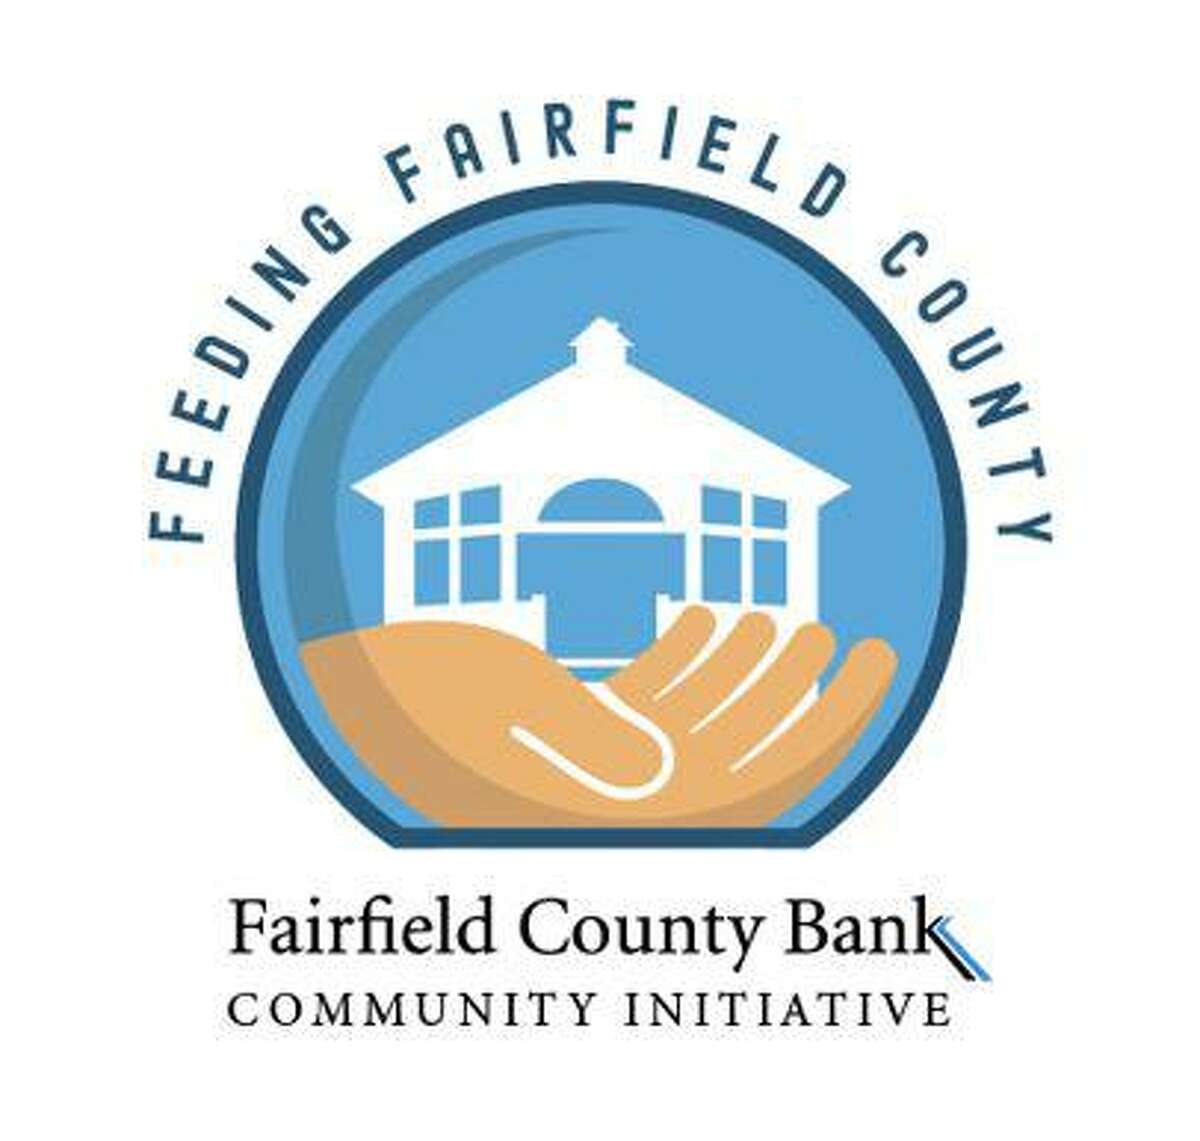 In response to the COVID-19 national health crisis, Fairfield County Bank has launched a new program, Feeding Fairfield County, and a $100,000 commitment to help feed the community.